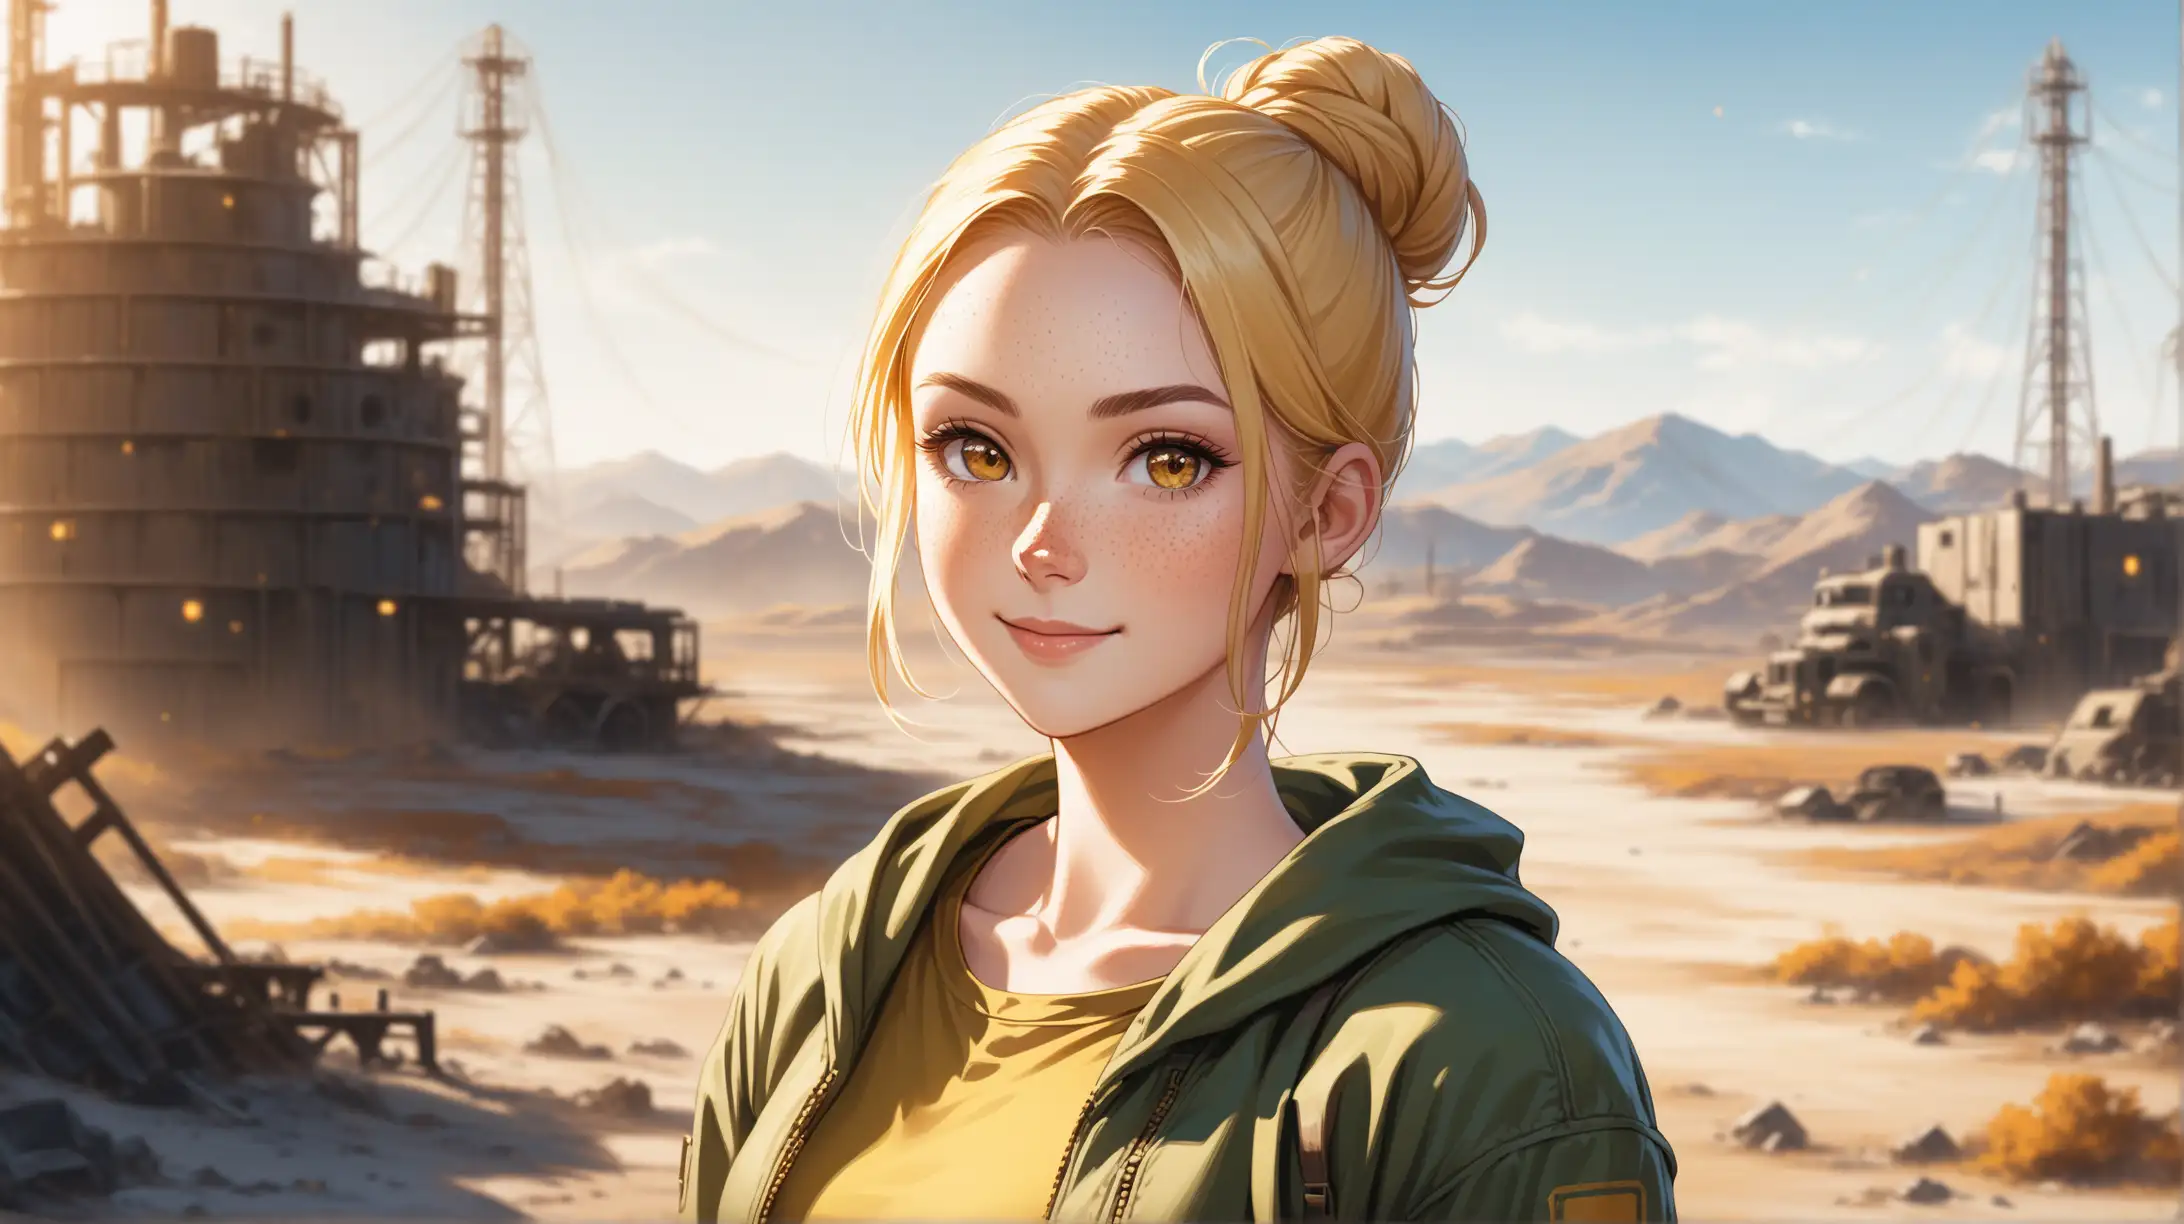 Draw a young woman, long blonde hair in a bun, gold eyes, freckles, perky figure,
outfit inspired from the Fallout series, high quality, long shot, outdoors, confident pose, natural lighting, smiling at the viewer